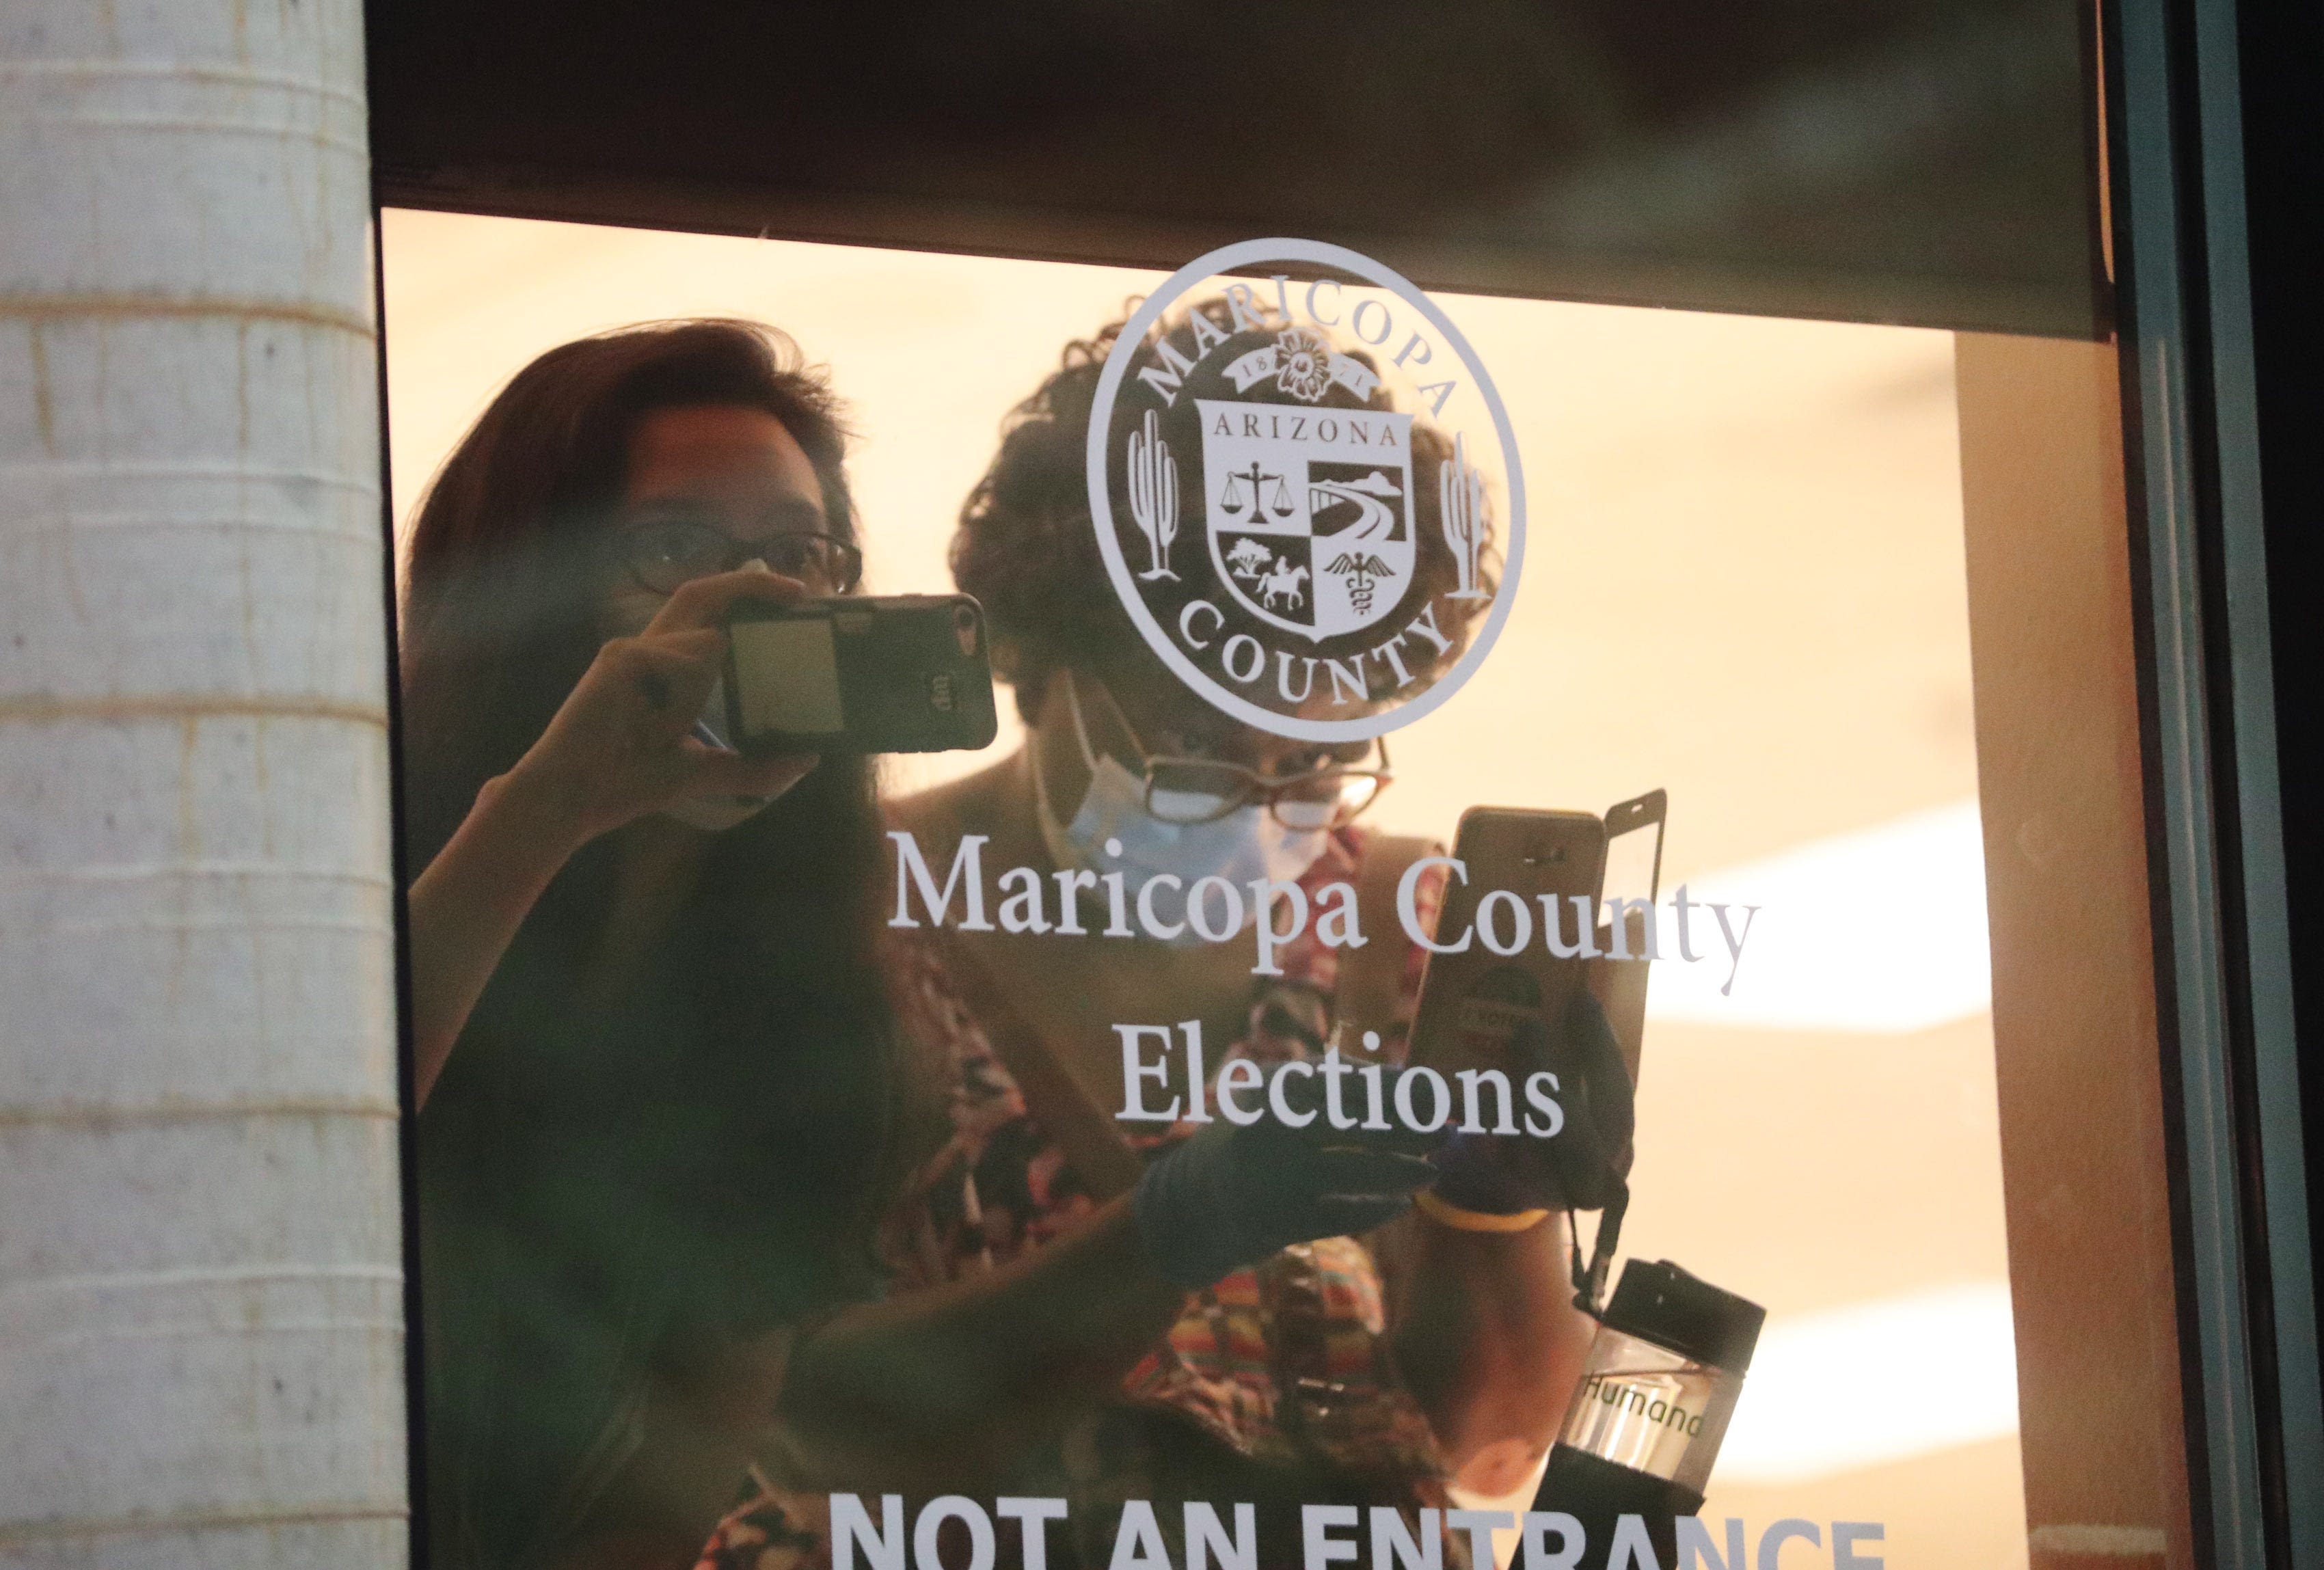 With more voters and security risks than ever, Maricopa County plans new elections center